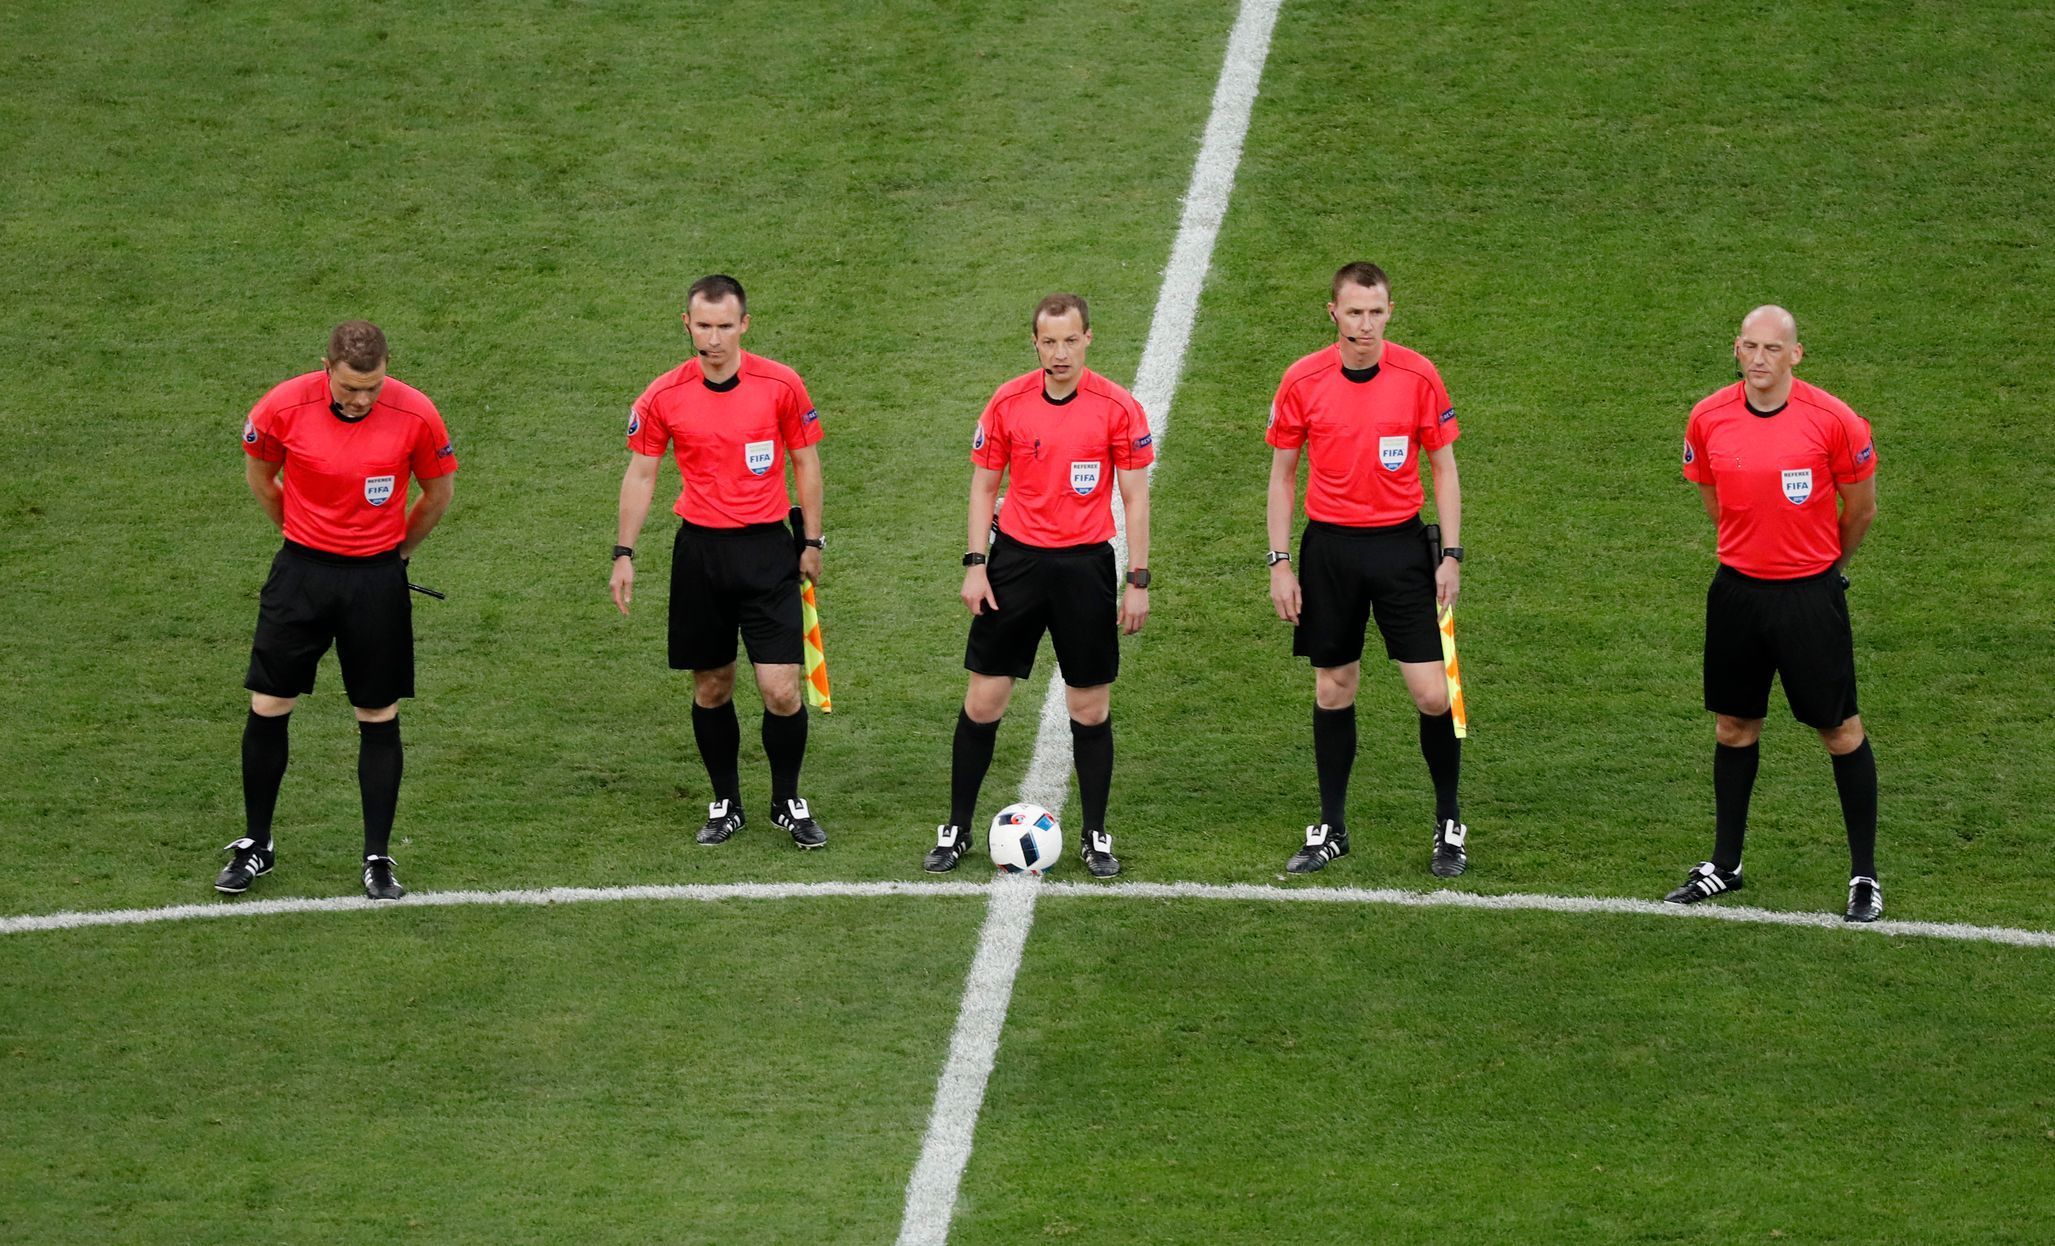 Referee William Collum and assistants line up before the game